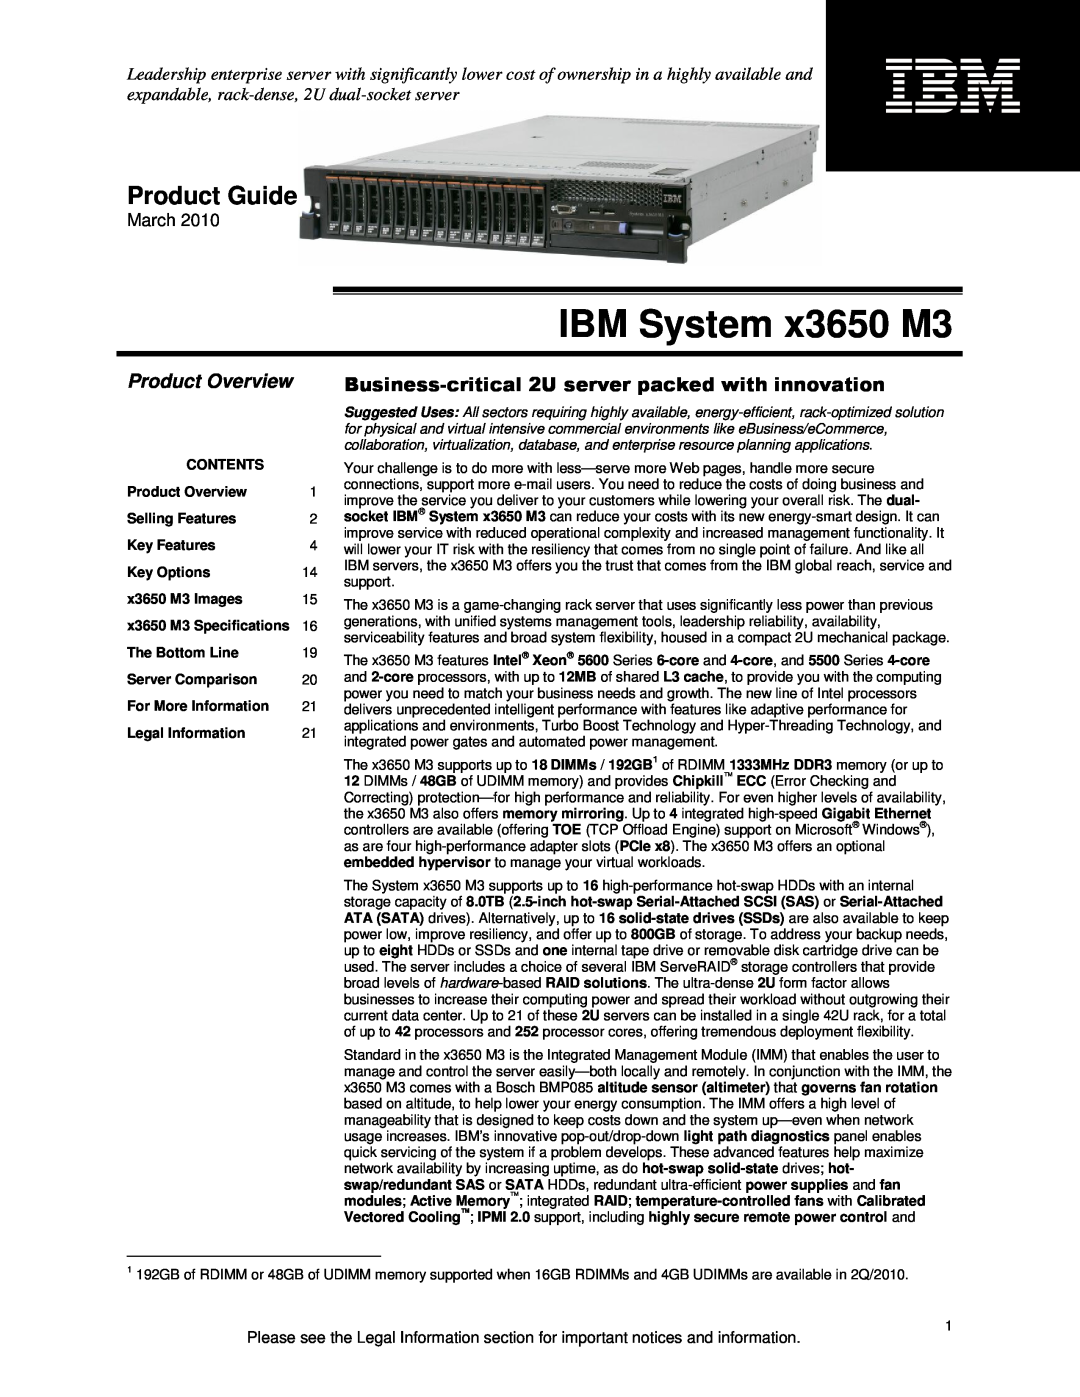 IBM X3650 M3 specifications Product Overview, IBM System x3650 M3, Product Guide, March 